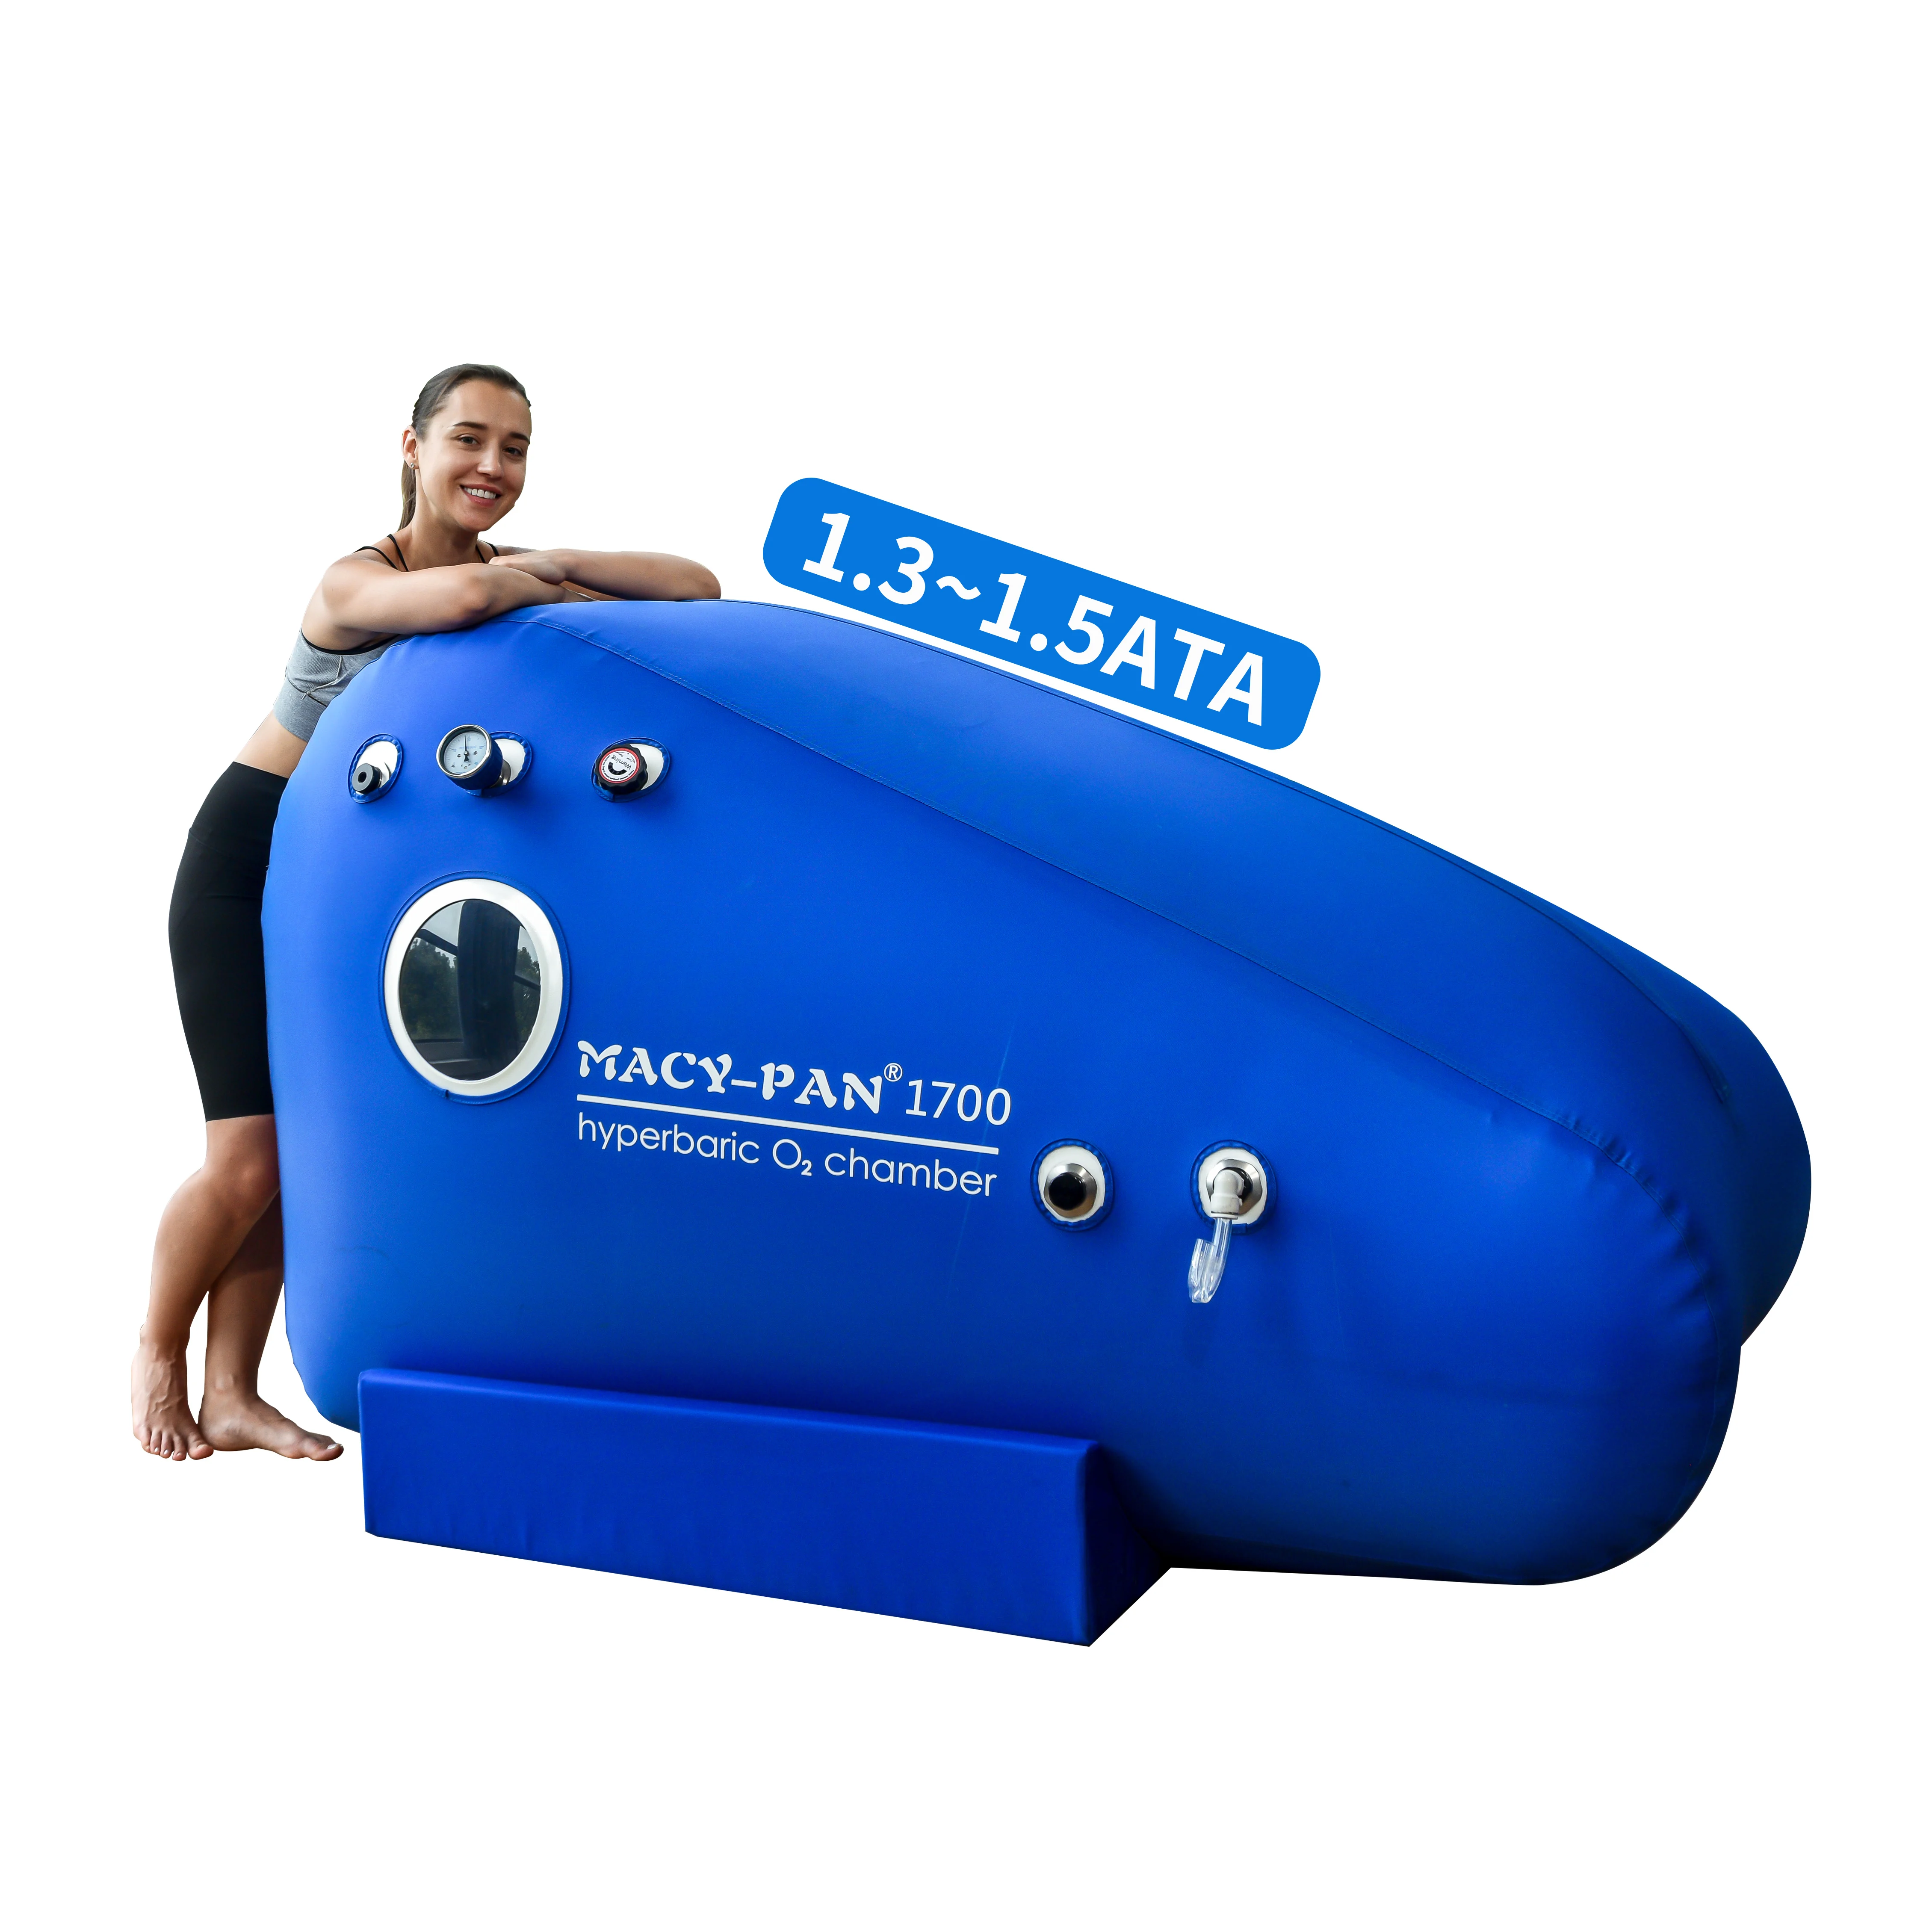 MACY-PAN ST1700 1.3/1.4/1.5ATA Sitting Hyperbaric Oxygen Chamber Portable HBOT Therapy Health/Beauty Care For Sale Home/Athletes